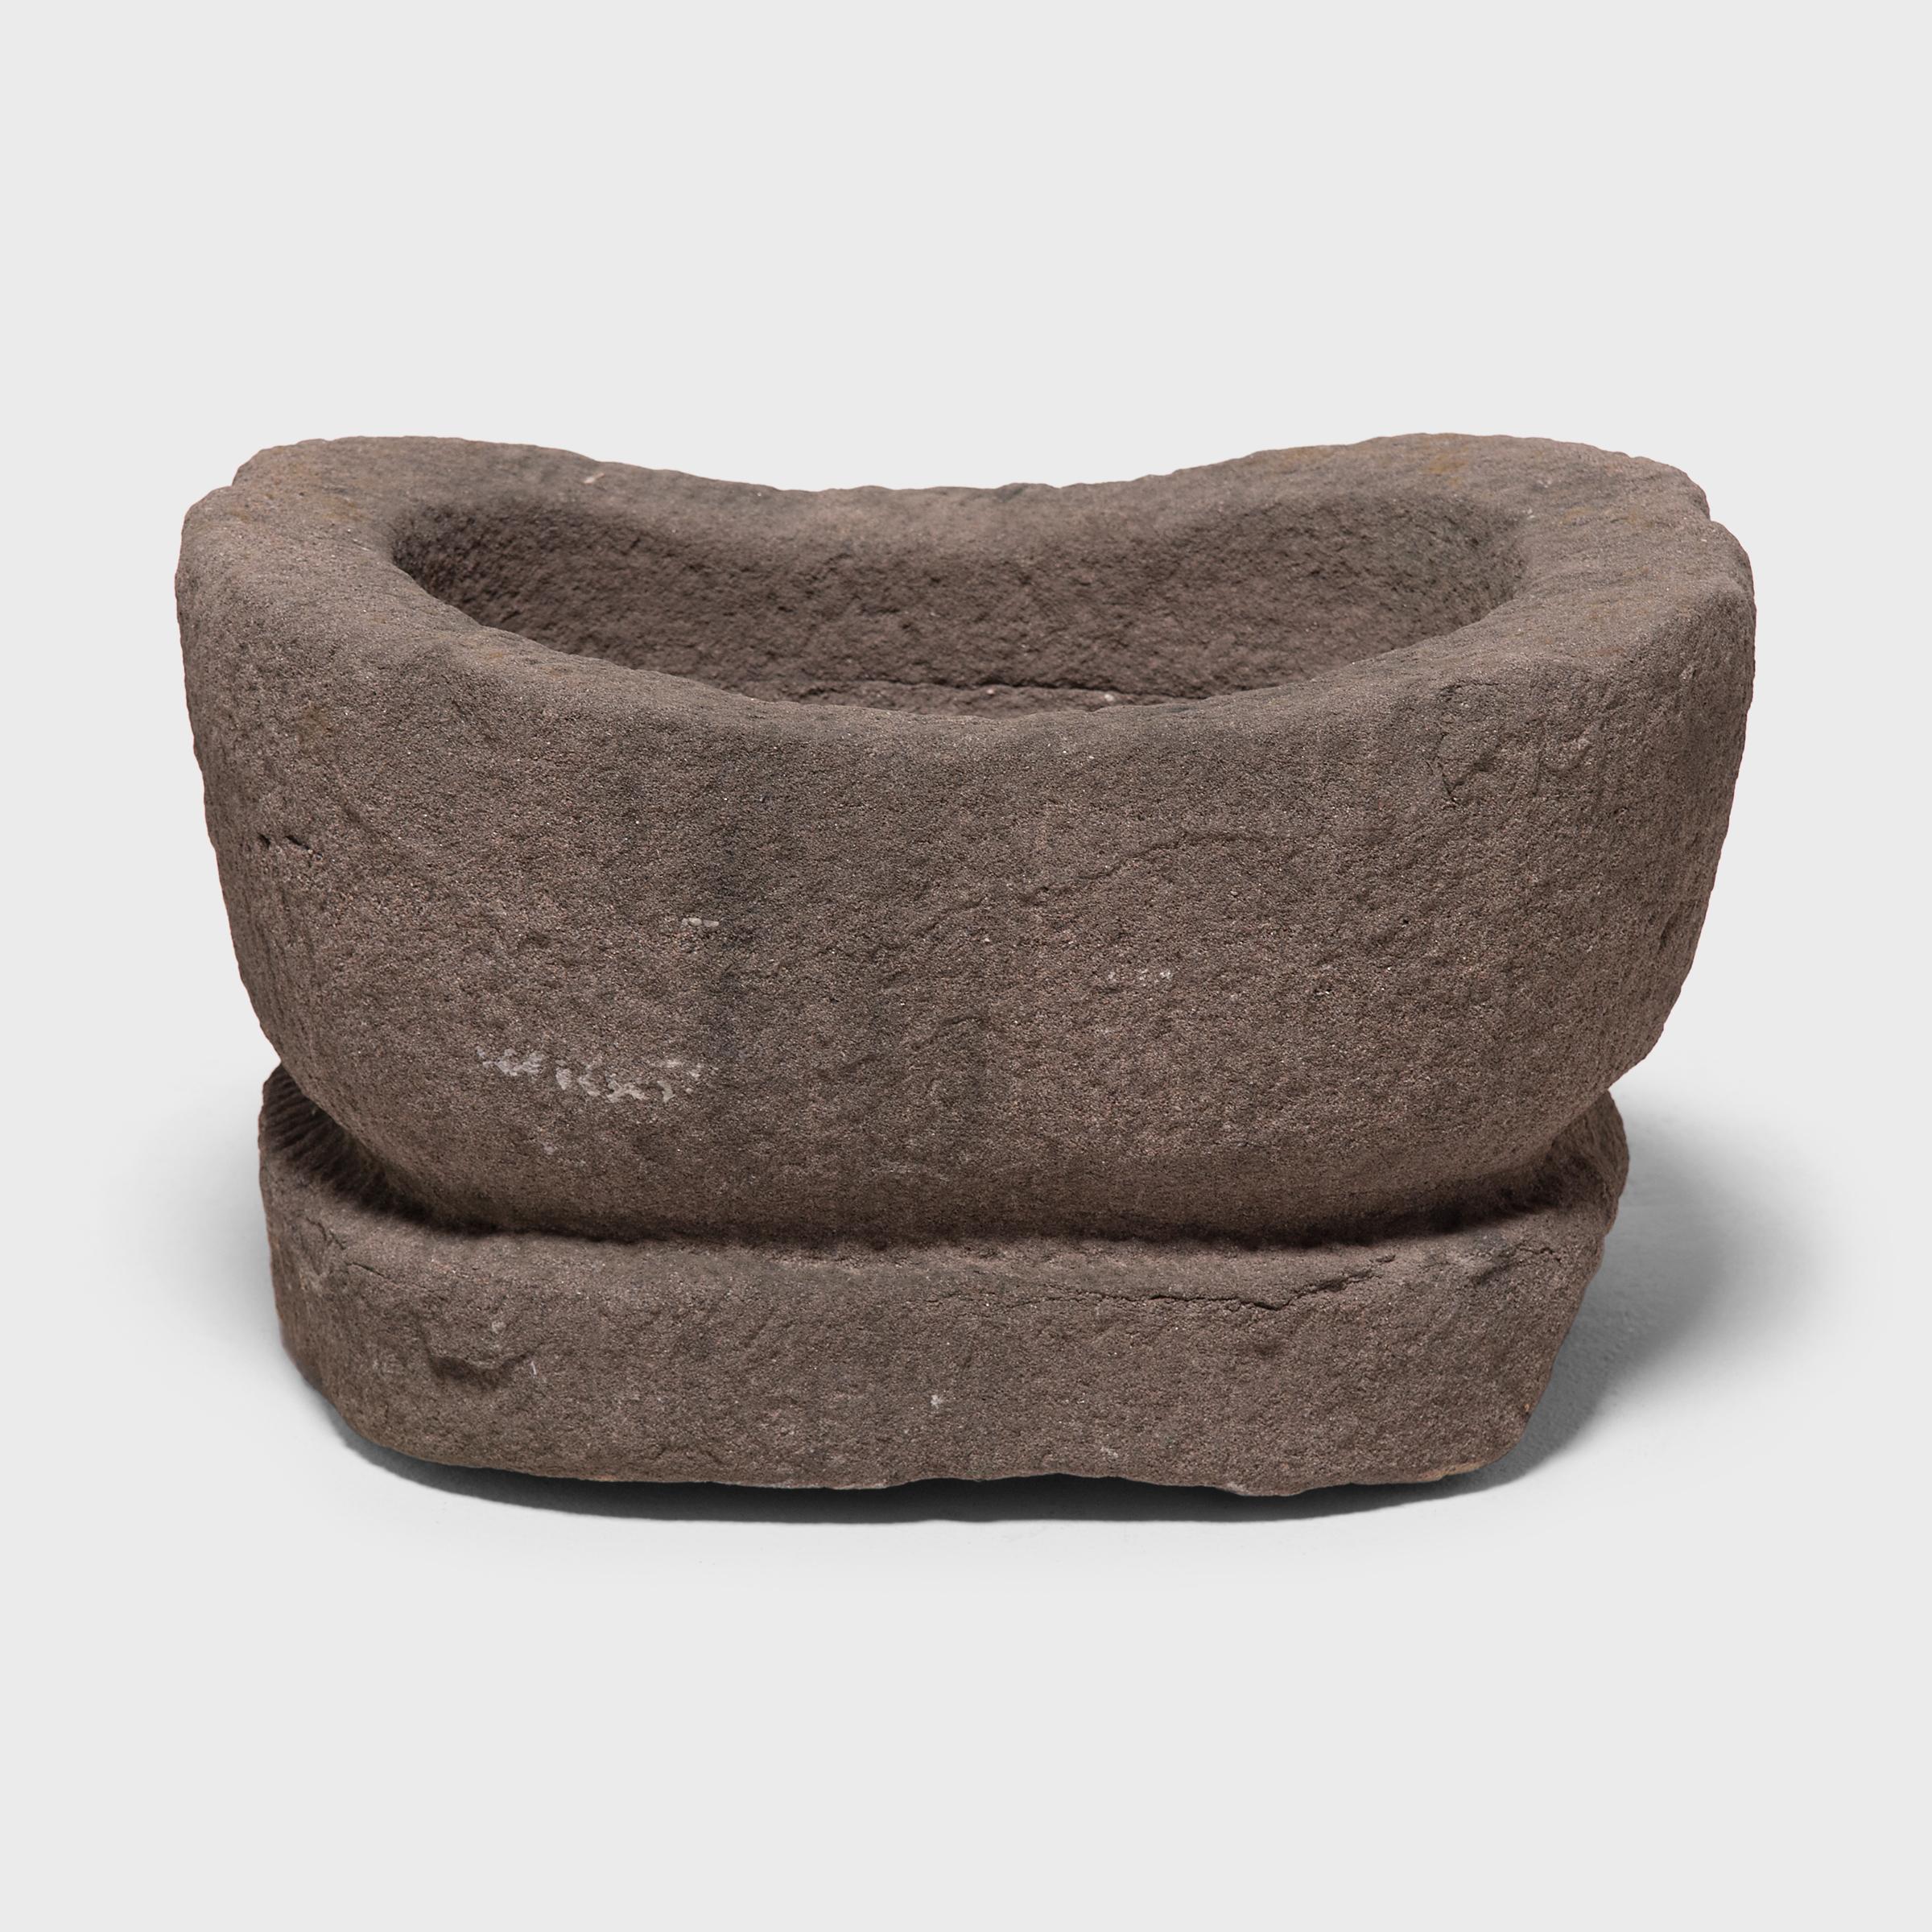 Qing Chinese Footed Stone Basin, c. 1900 For Sale